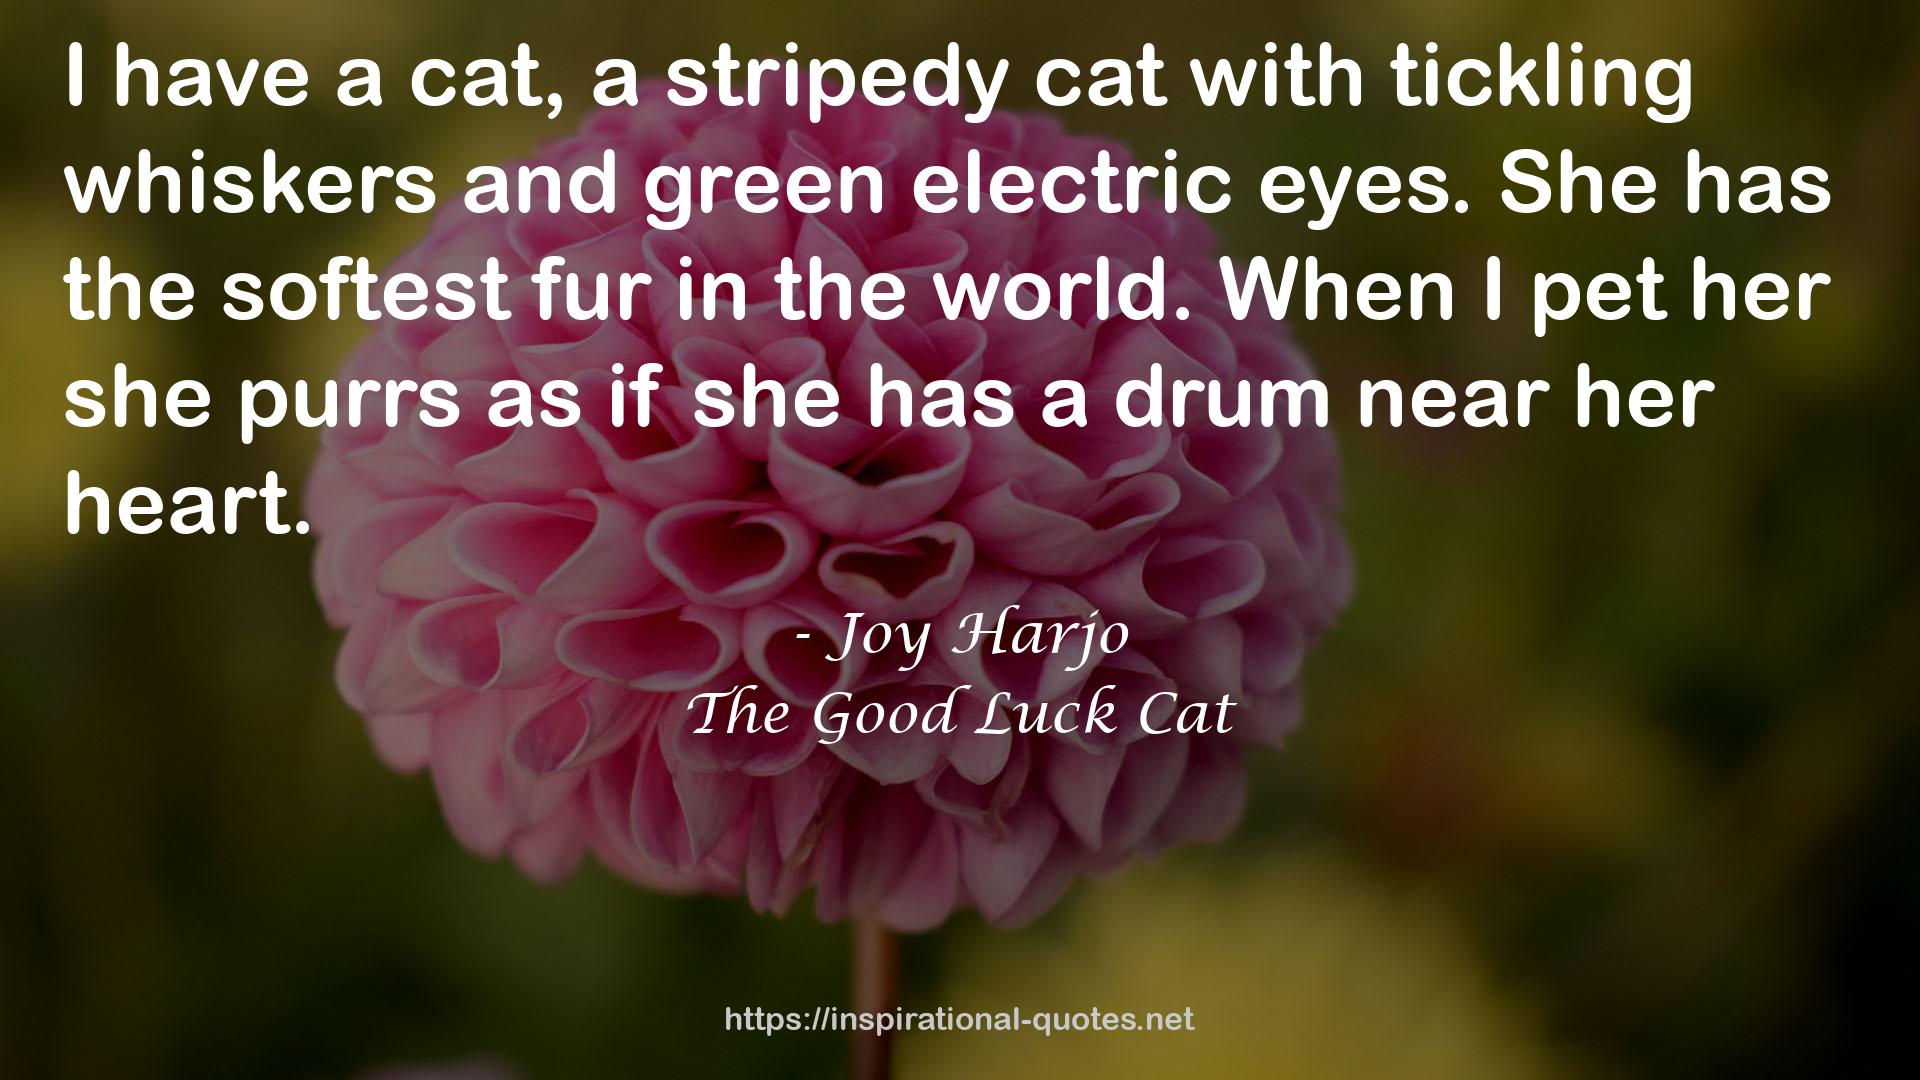 The Good Luck Cat QUOTES